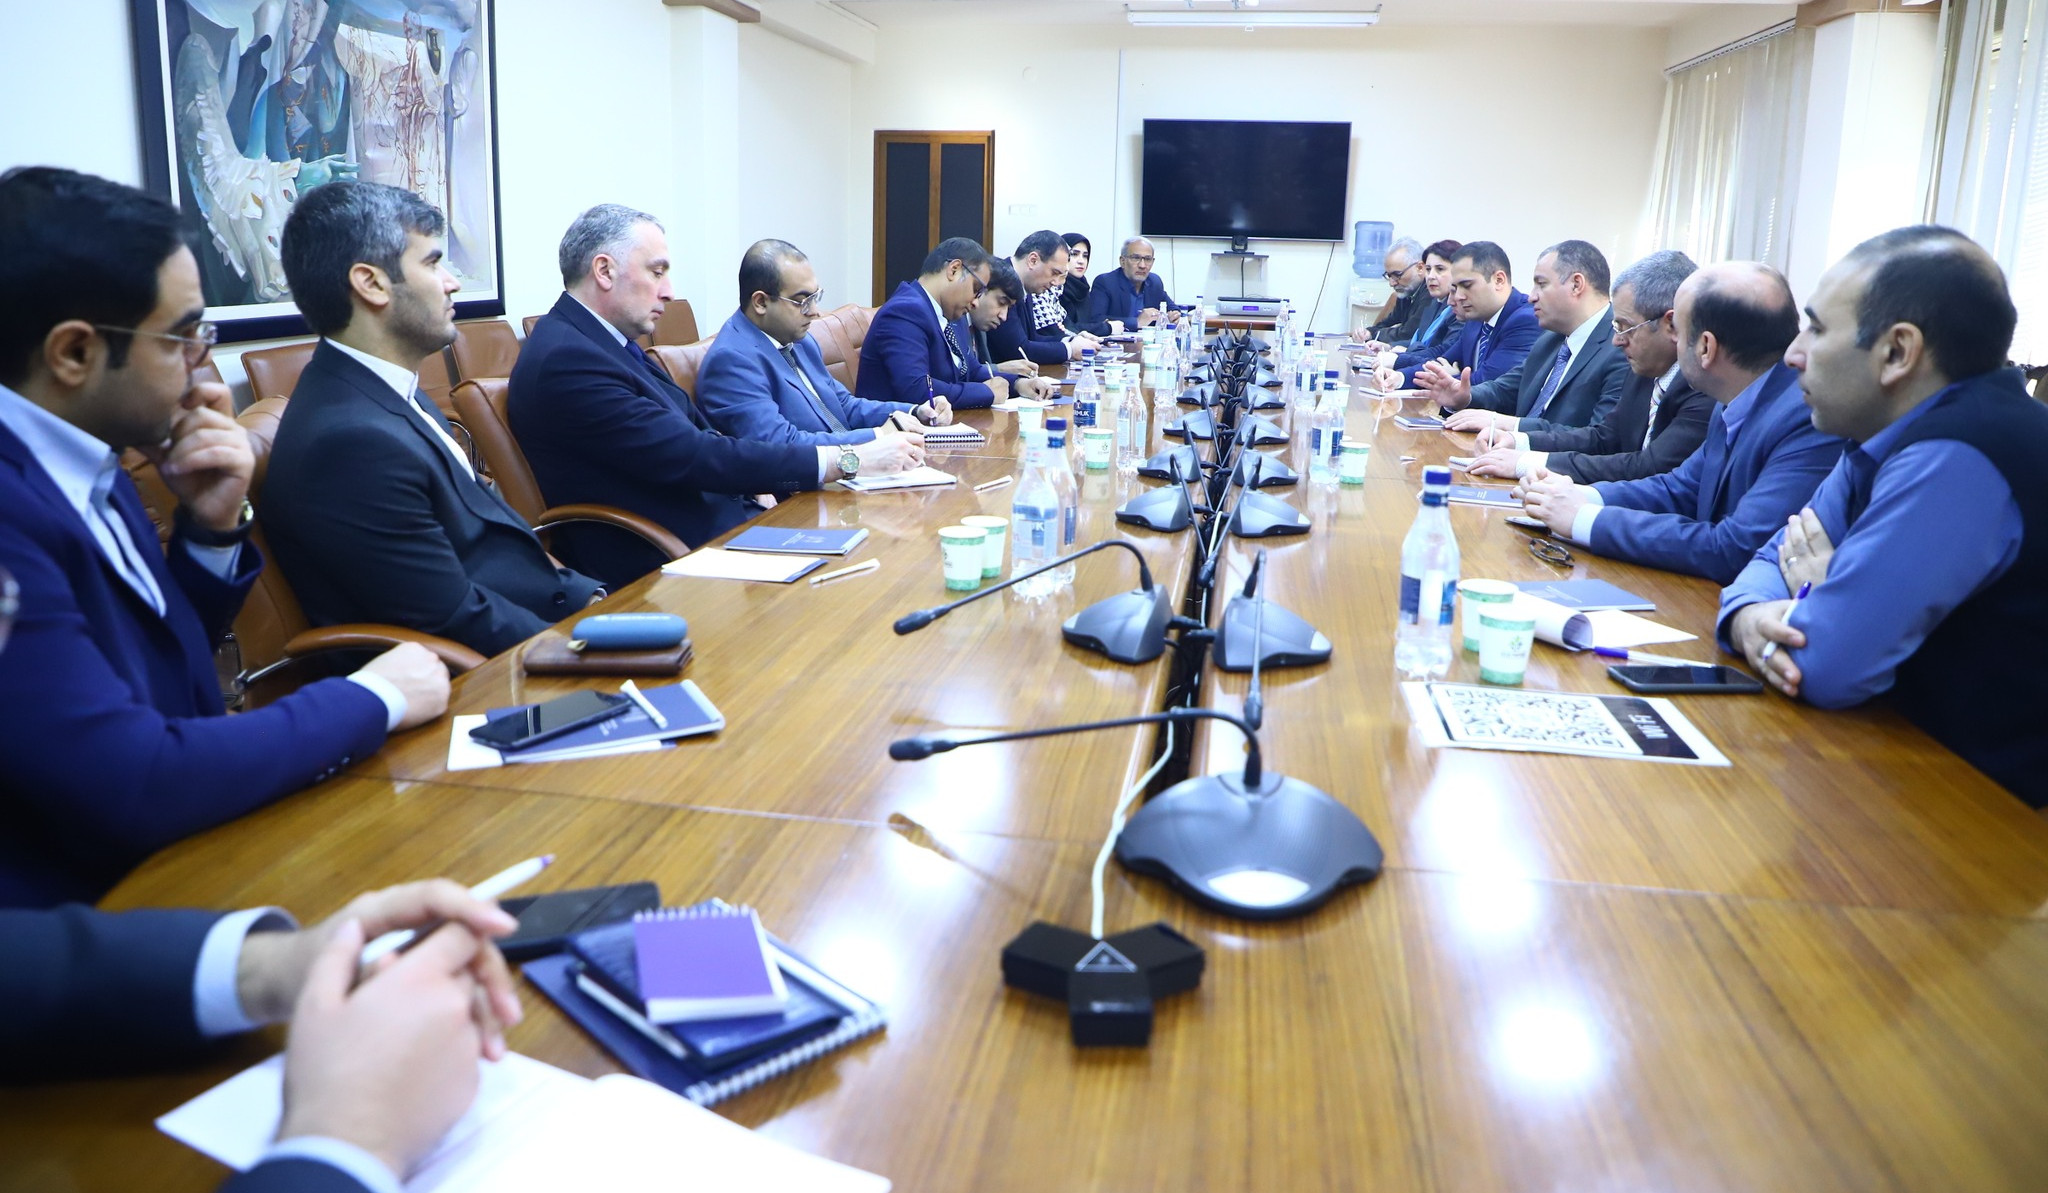 Kerobyan presented opportunities offered by Crossroads of Peace to experts of India, Iran, Georgia, and Armenia